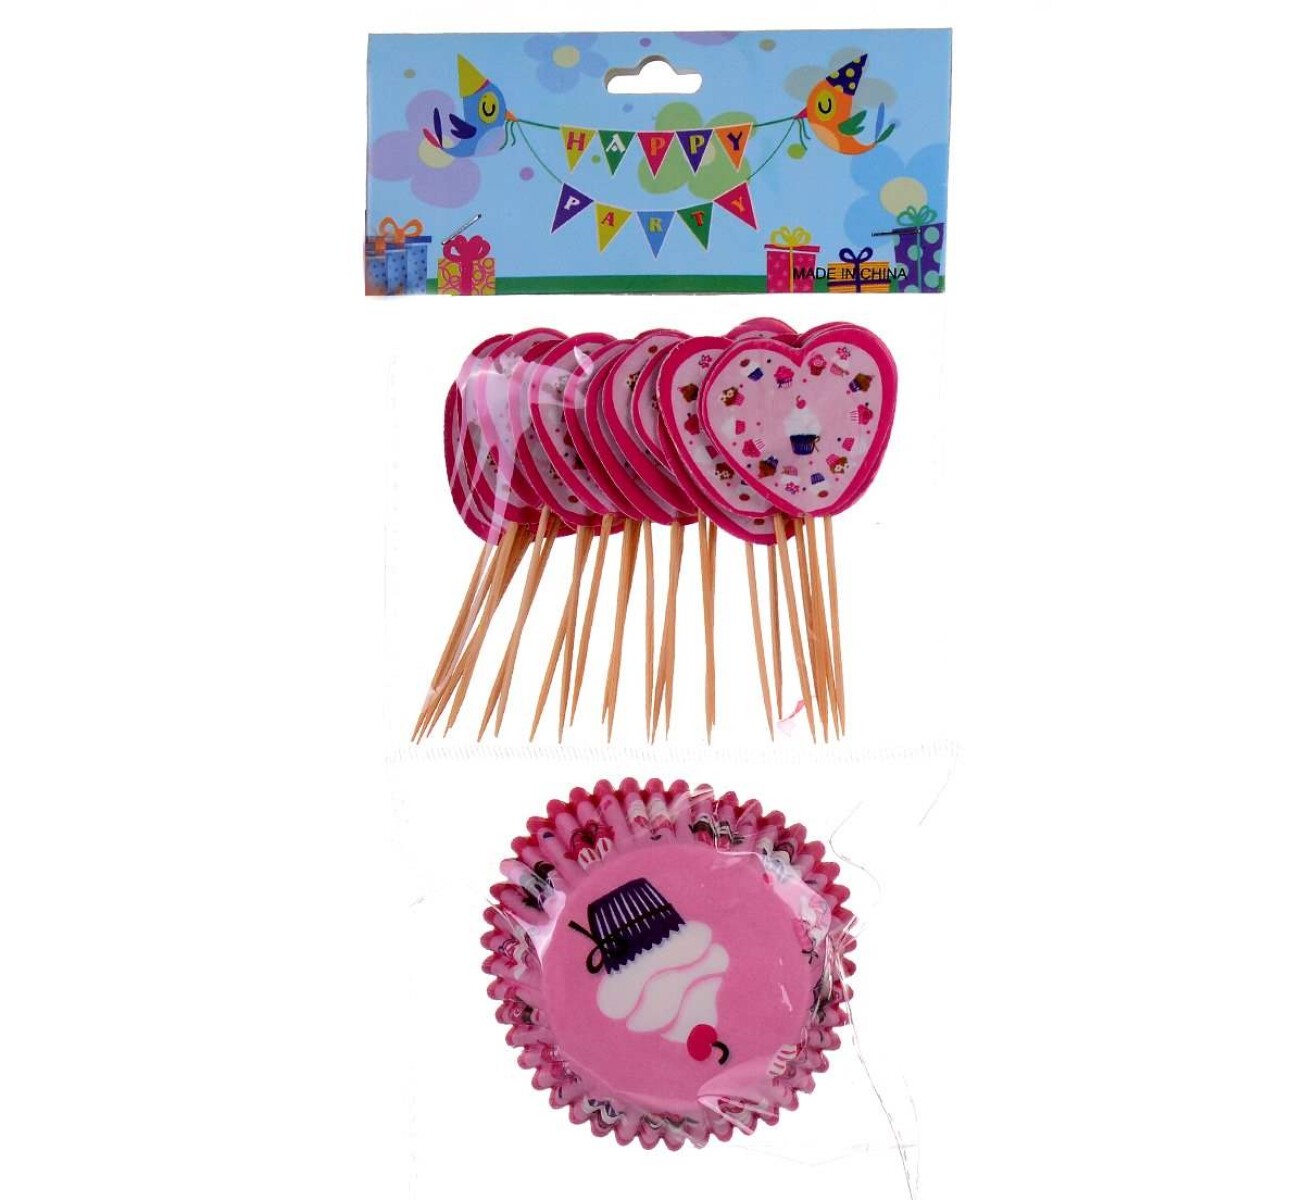 Set Muffins Con Topping Varios Diseños X24 - Unica 